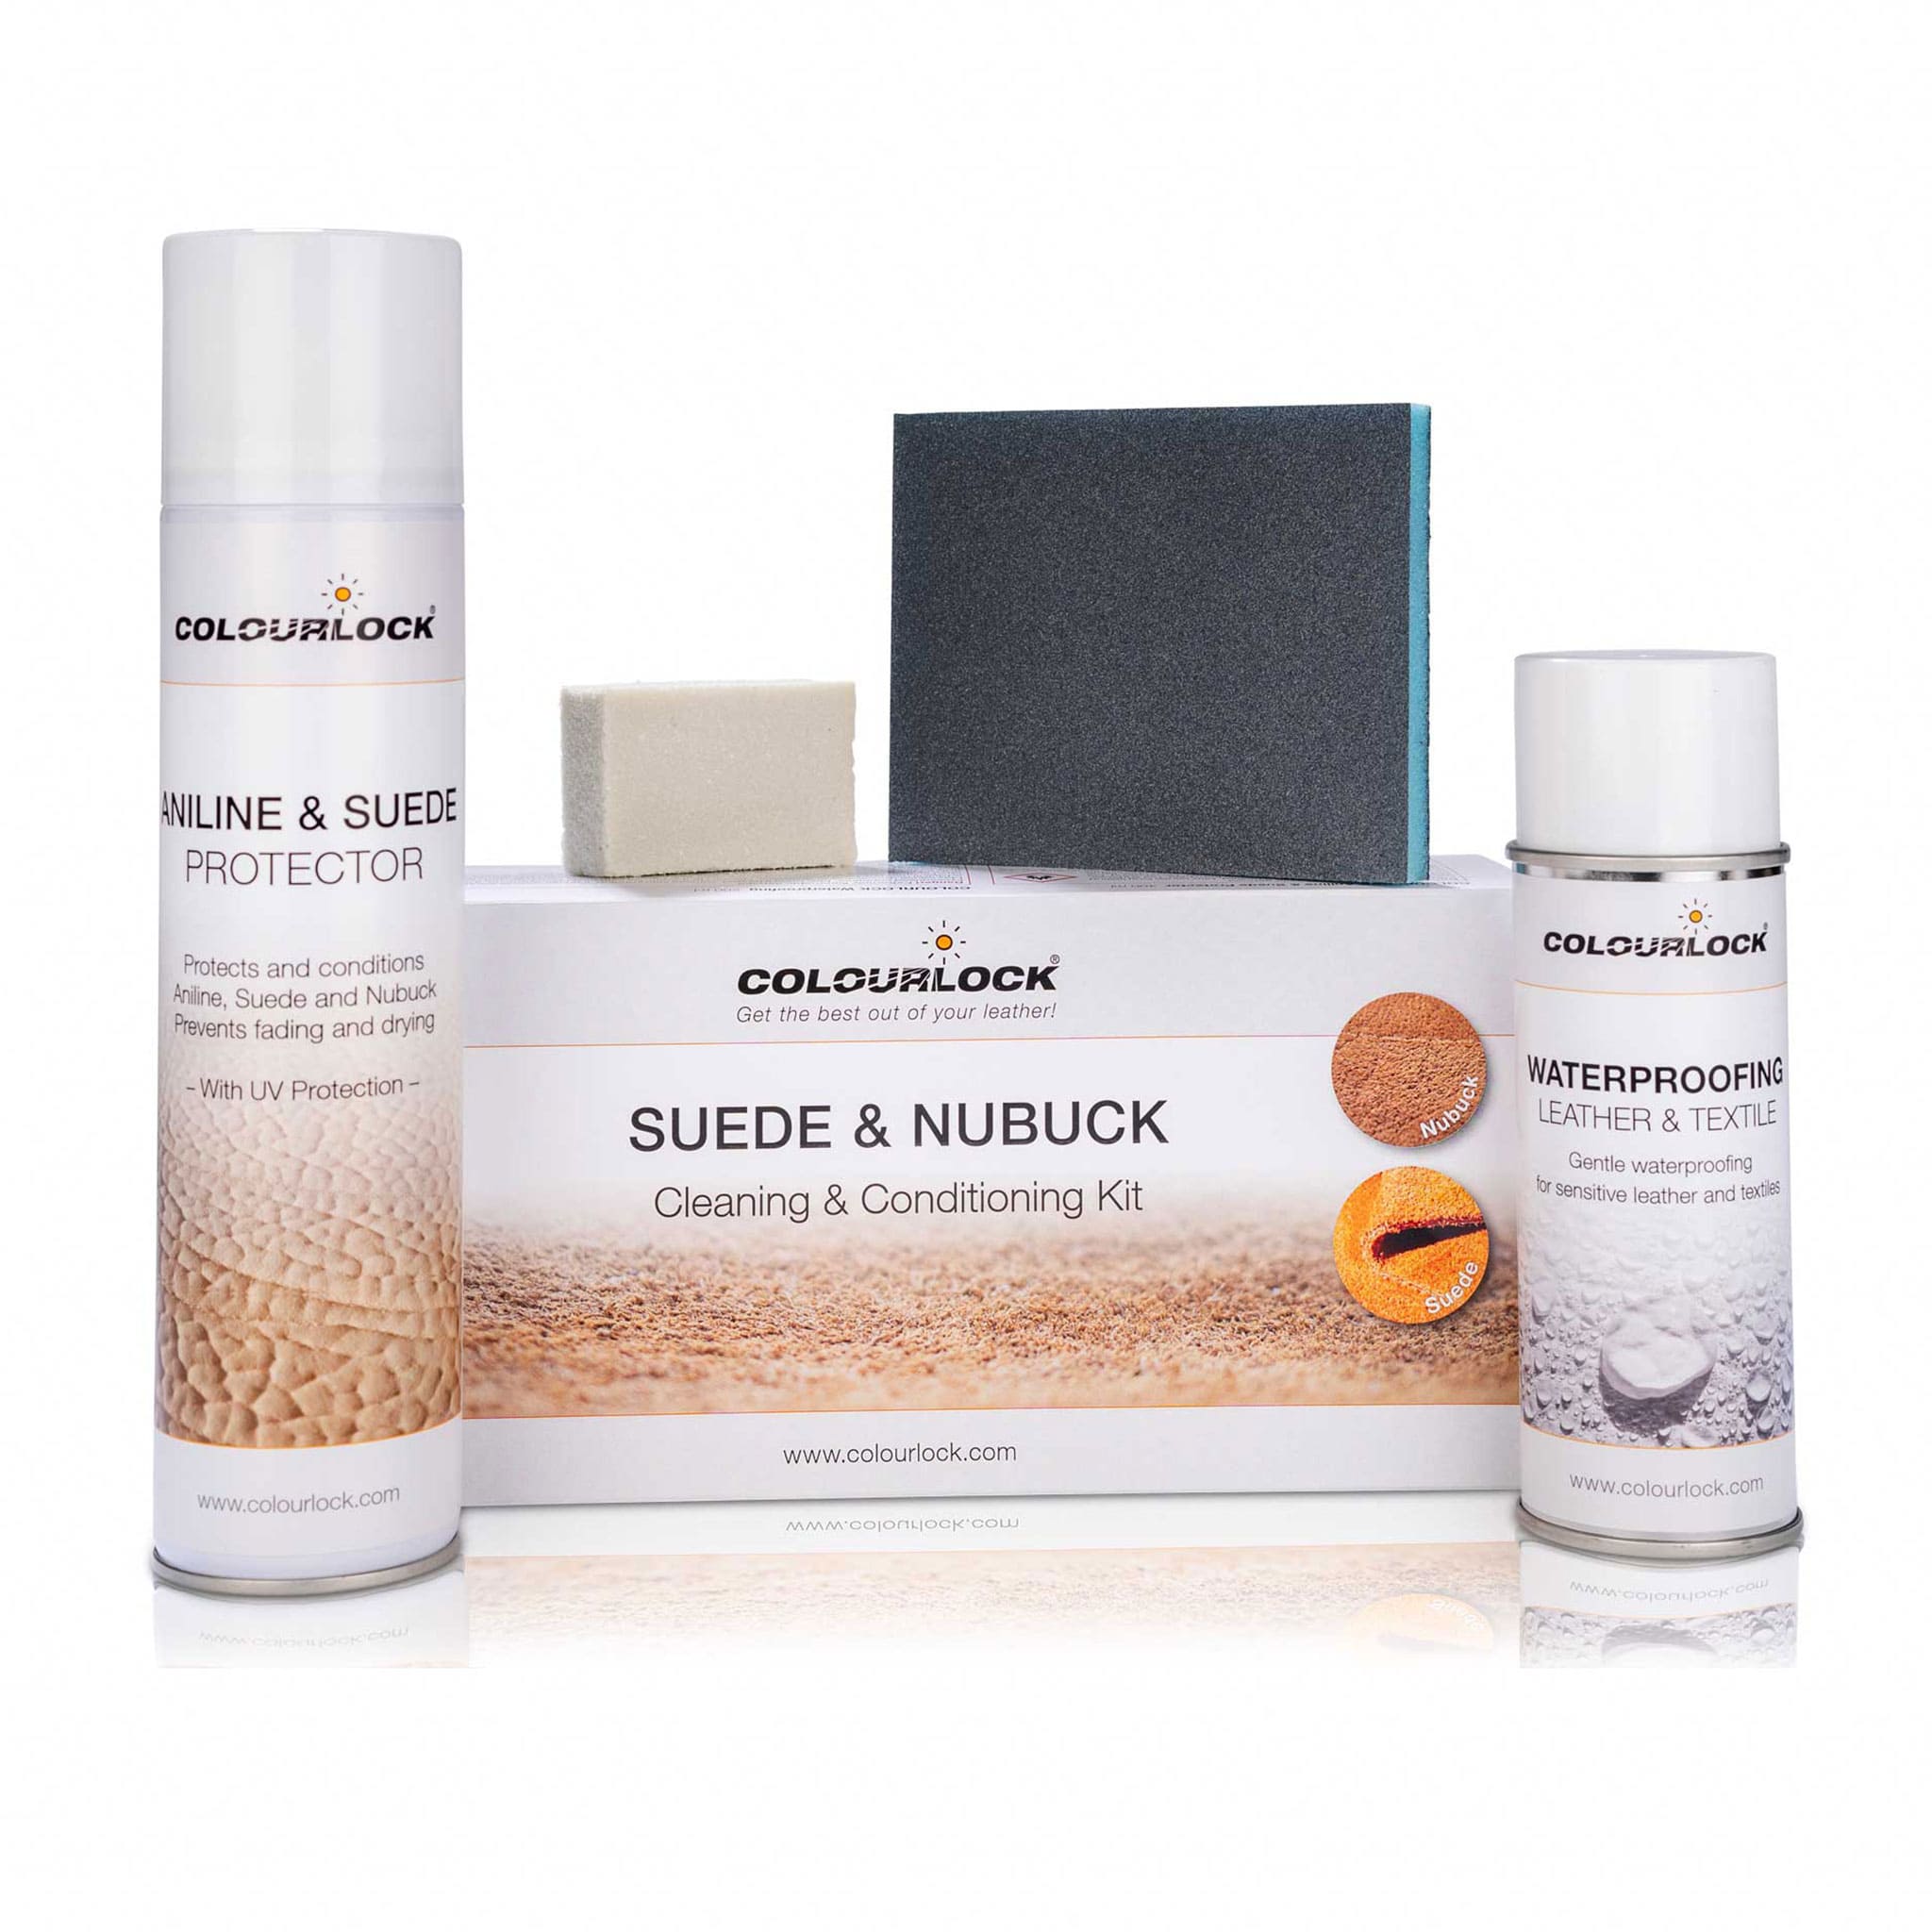 Suede & Nubuck Cleaning & Conditioning Kit